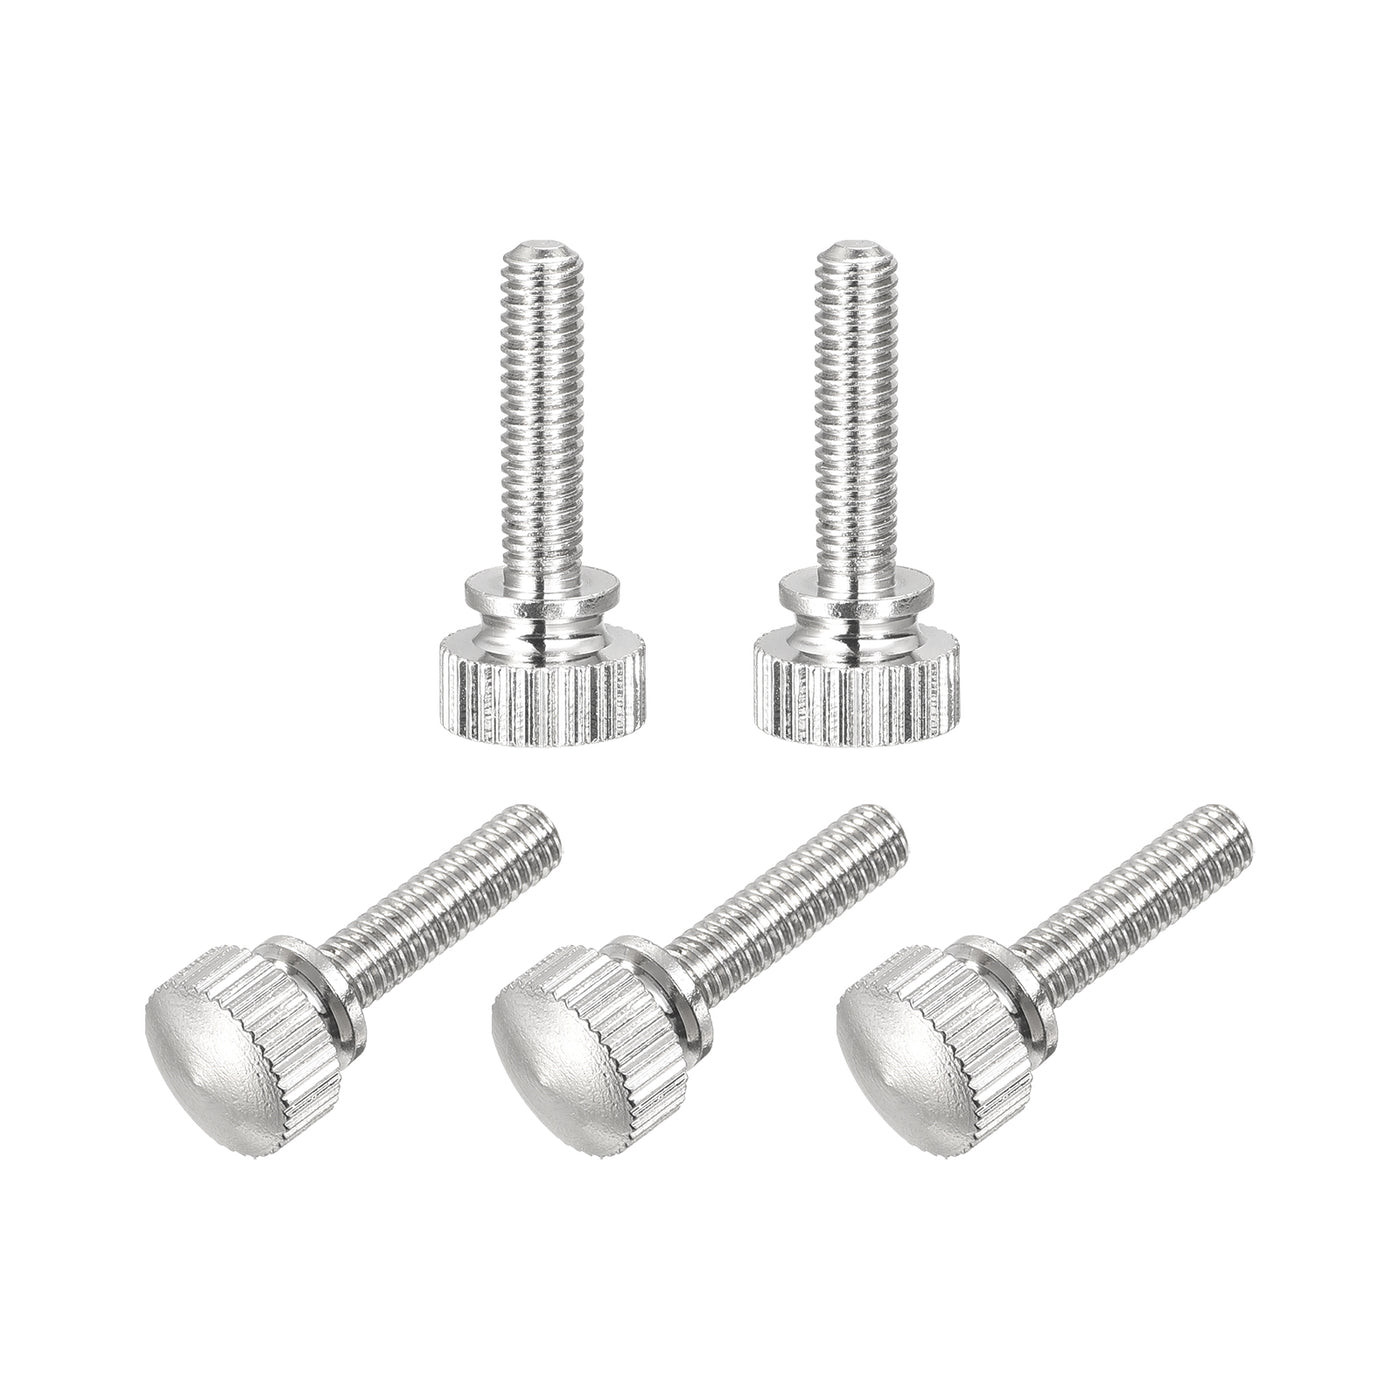 uxcell Uxcell Knurled Thumb Screws, M4x16mm Brass Shoulder Bolts Grip Knobs Fasteners, Nickel Plated 5Pcs